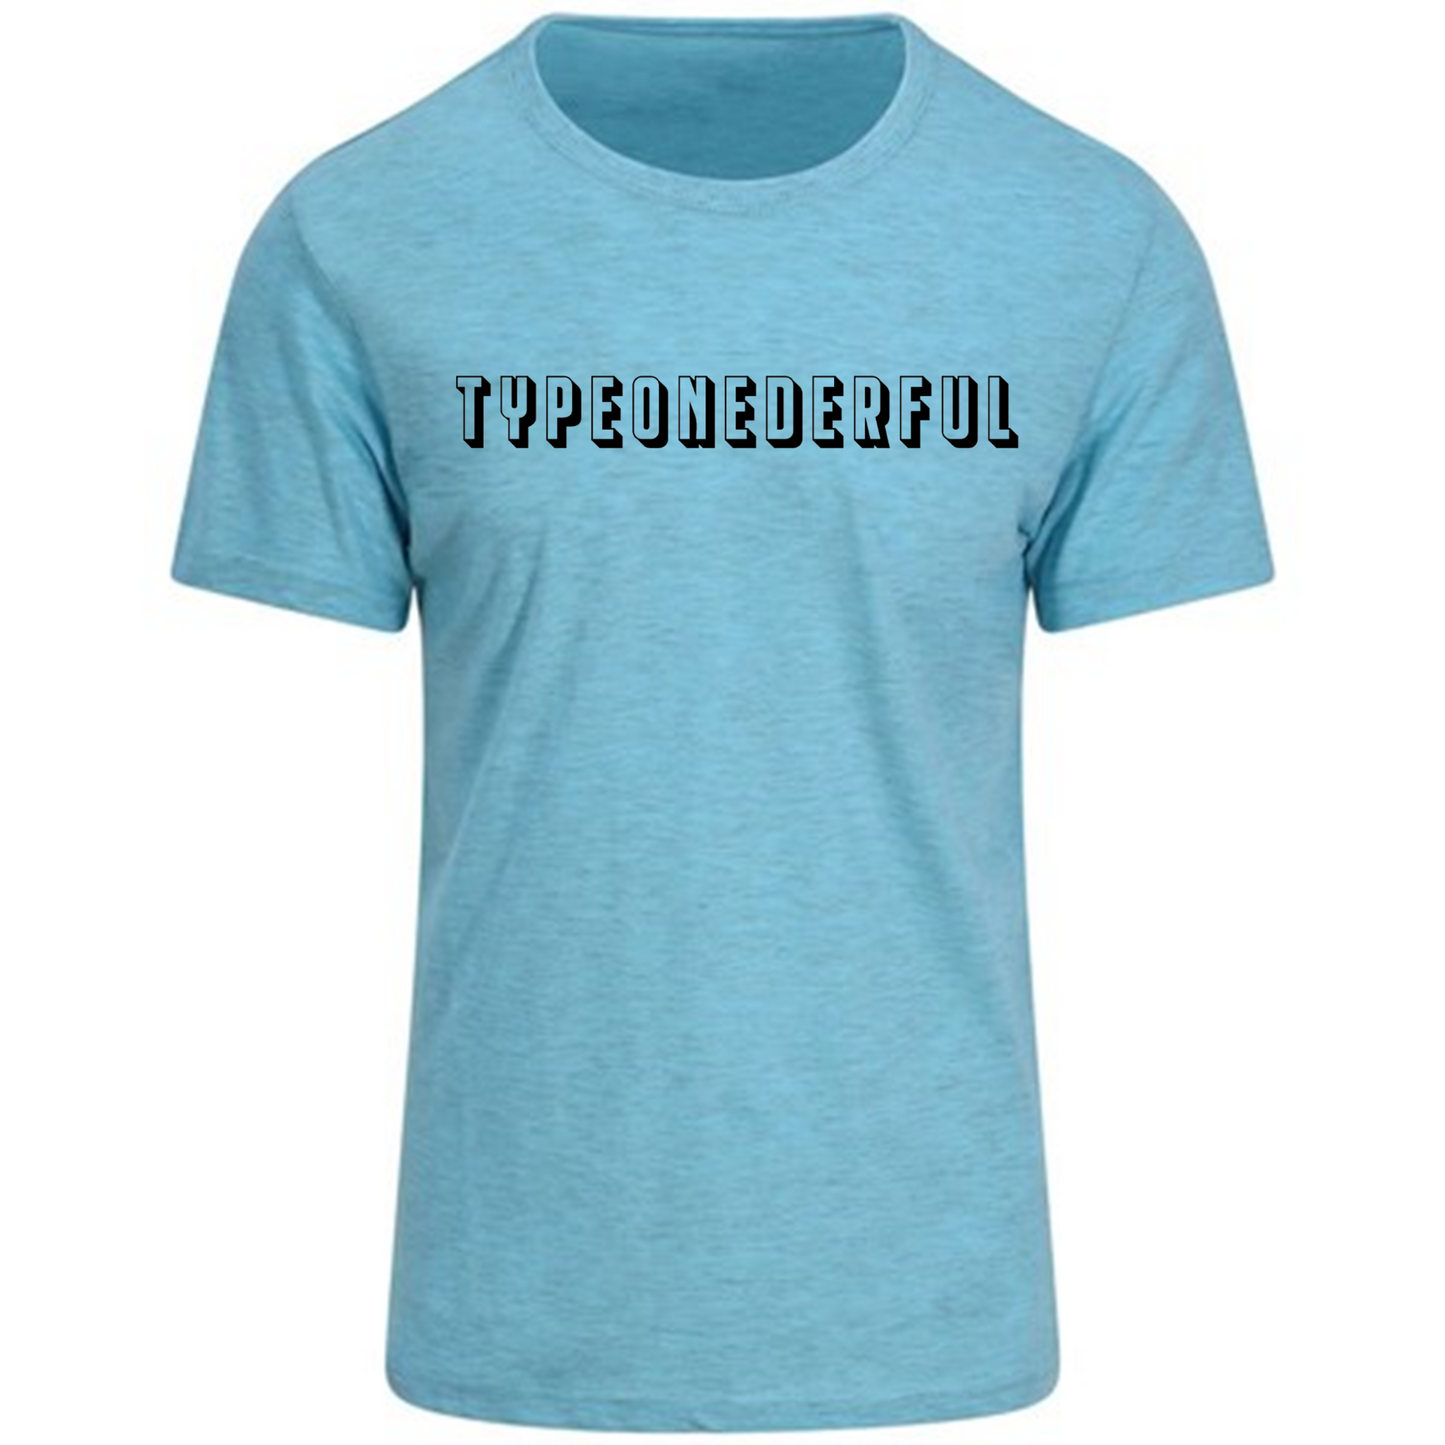 Typeonederful Pastel T-Shirt